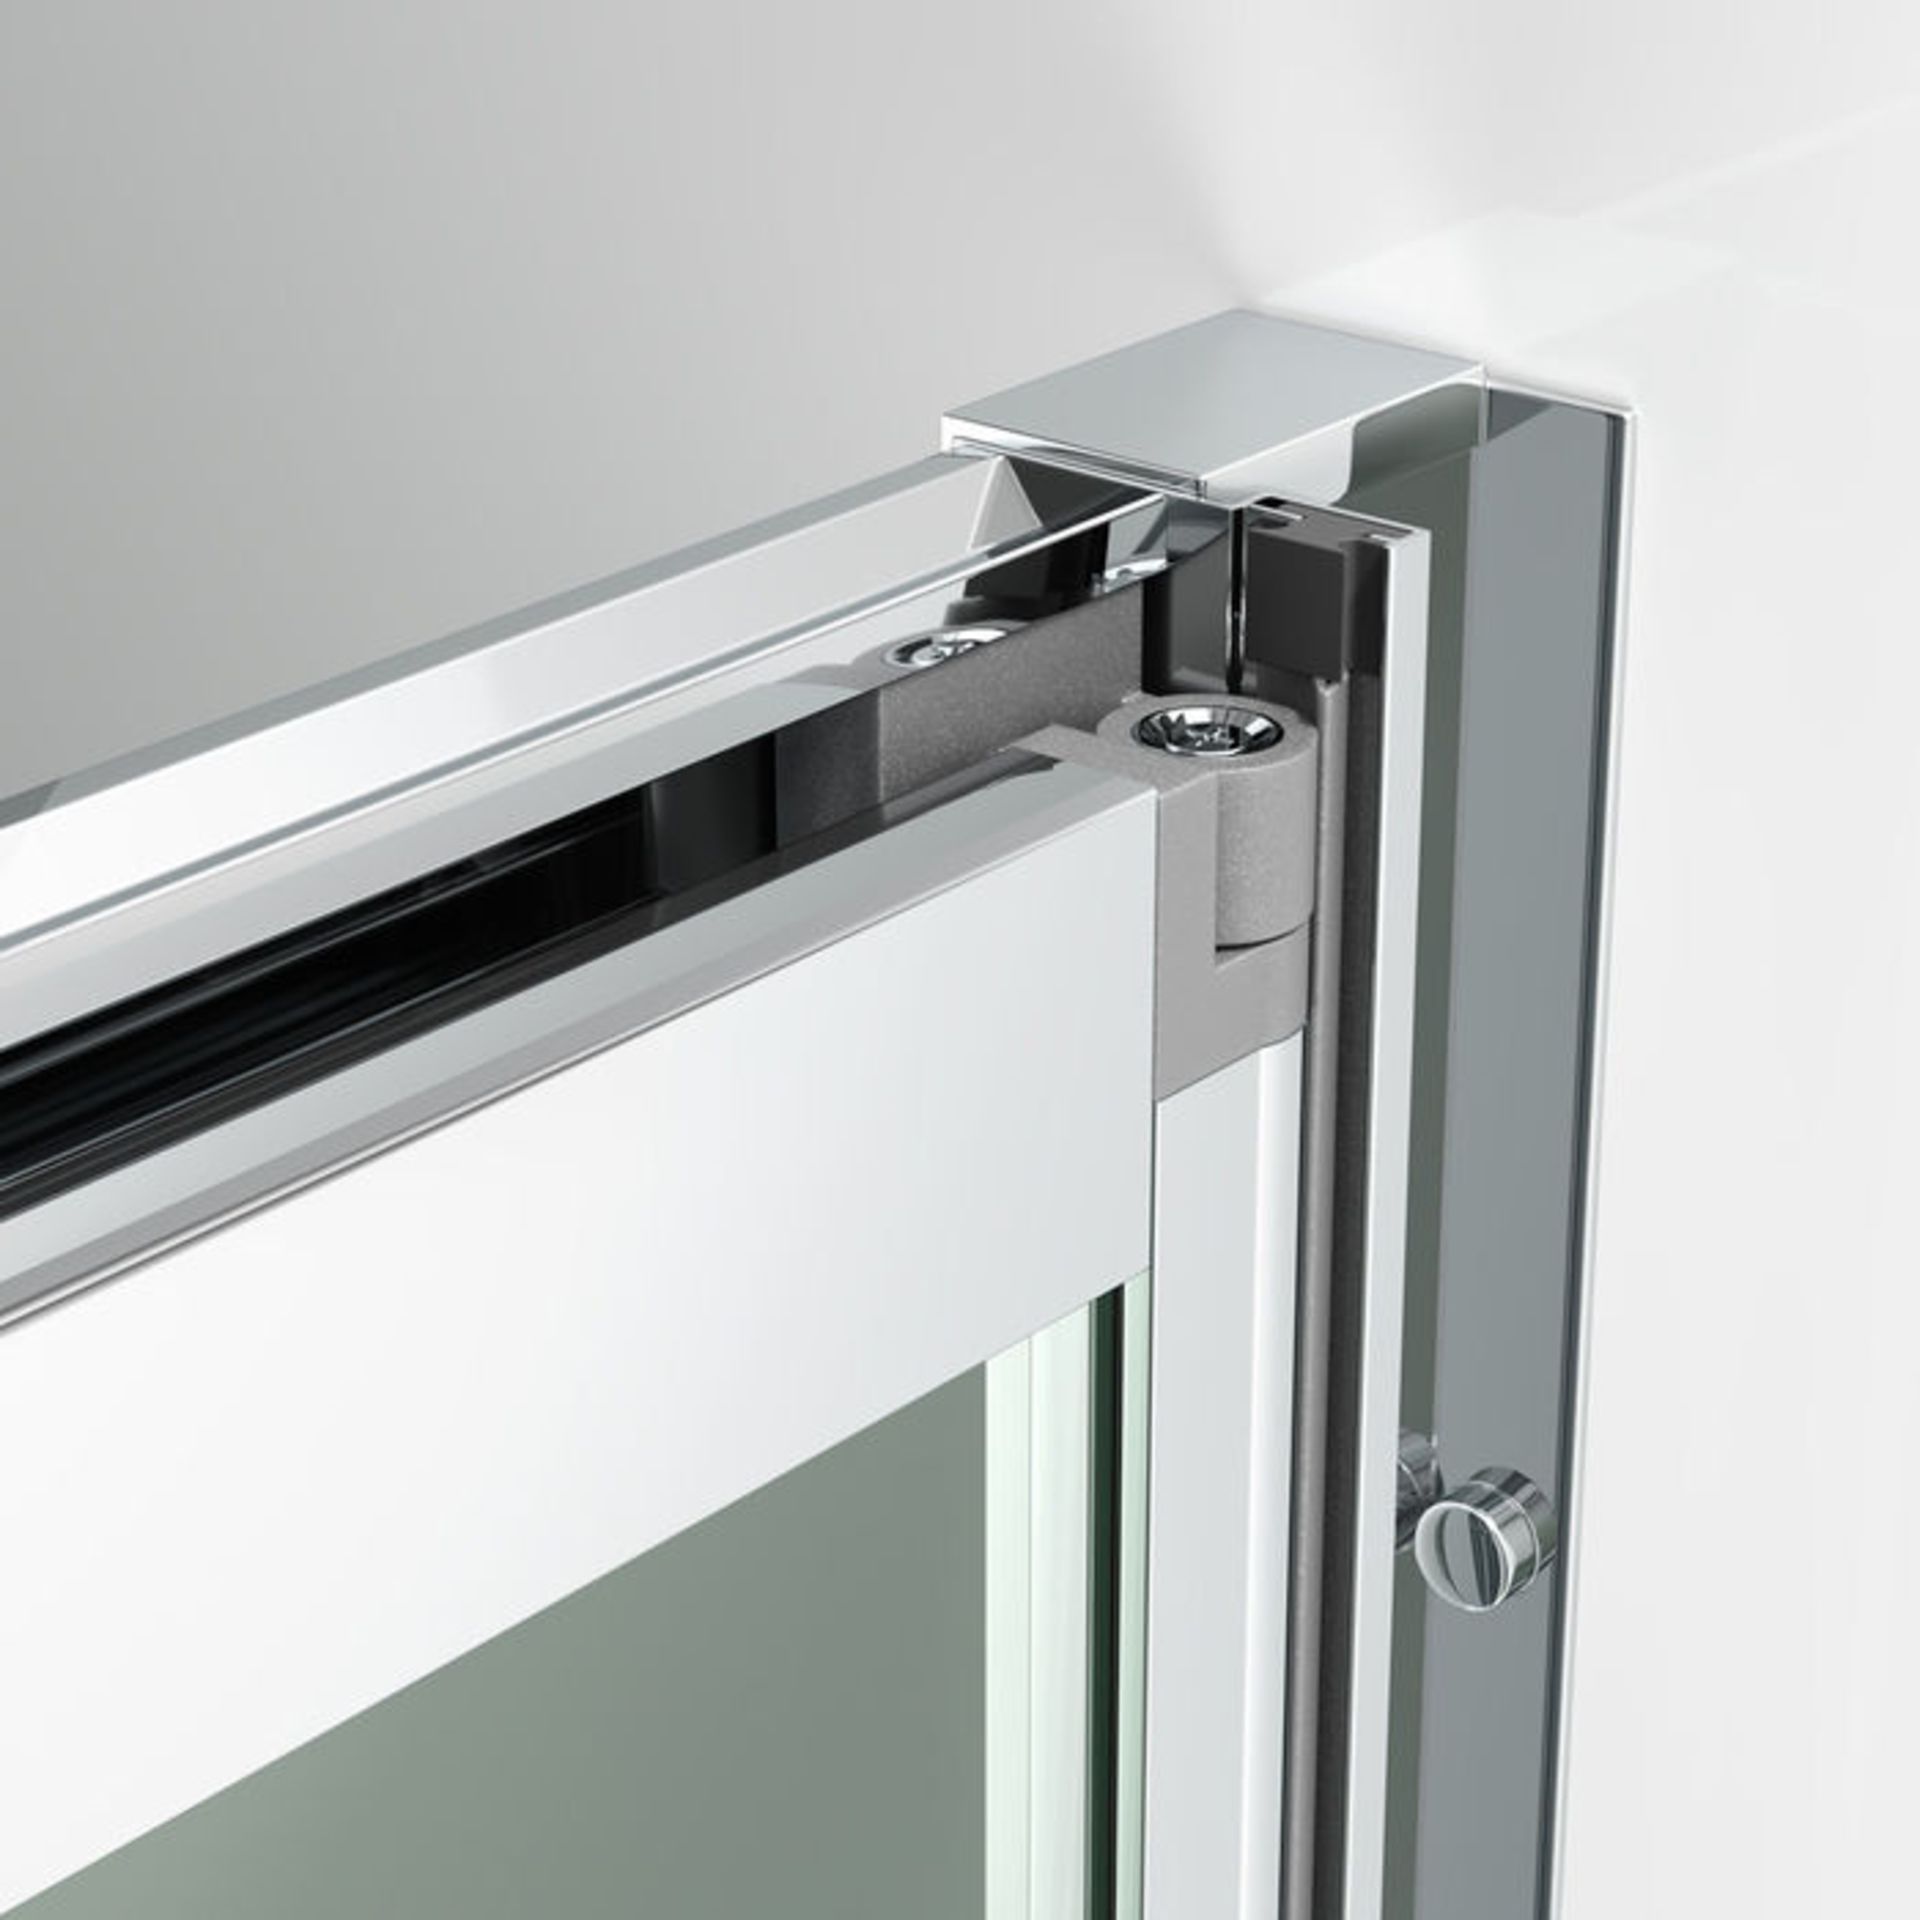 (XM19) 800mm - 6mm - Elements EasyClean Bifold Shower Door. RRP £299.99. 6mm Safety Glass - Single- - Image 3 of 3